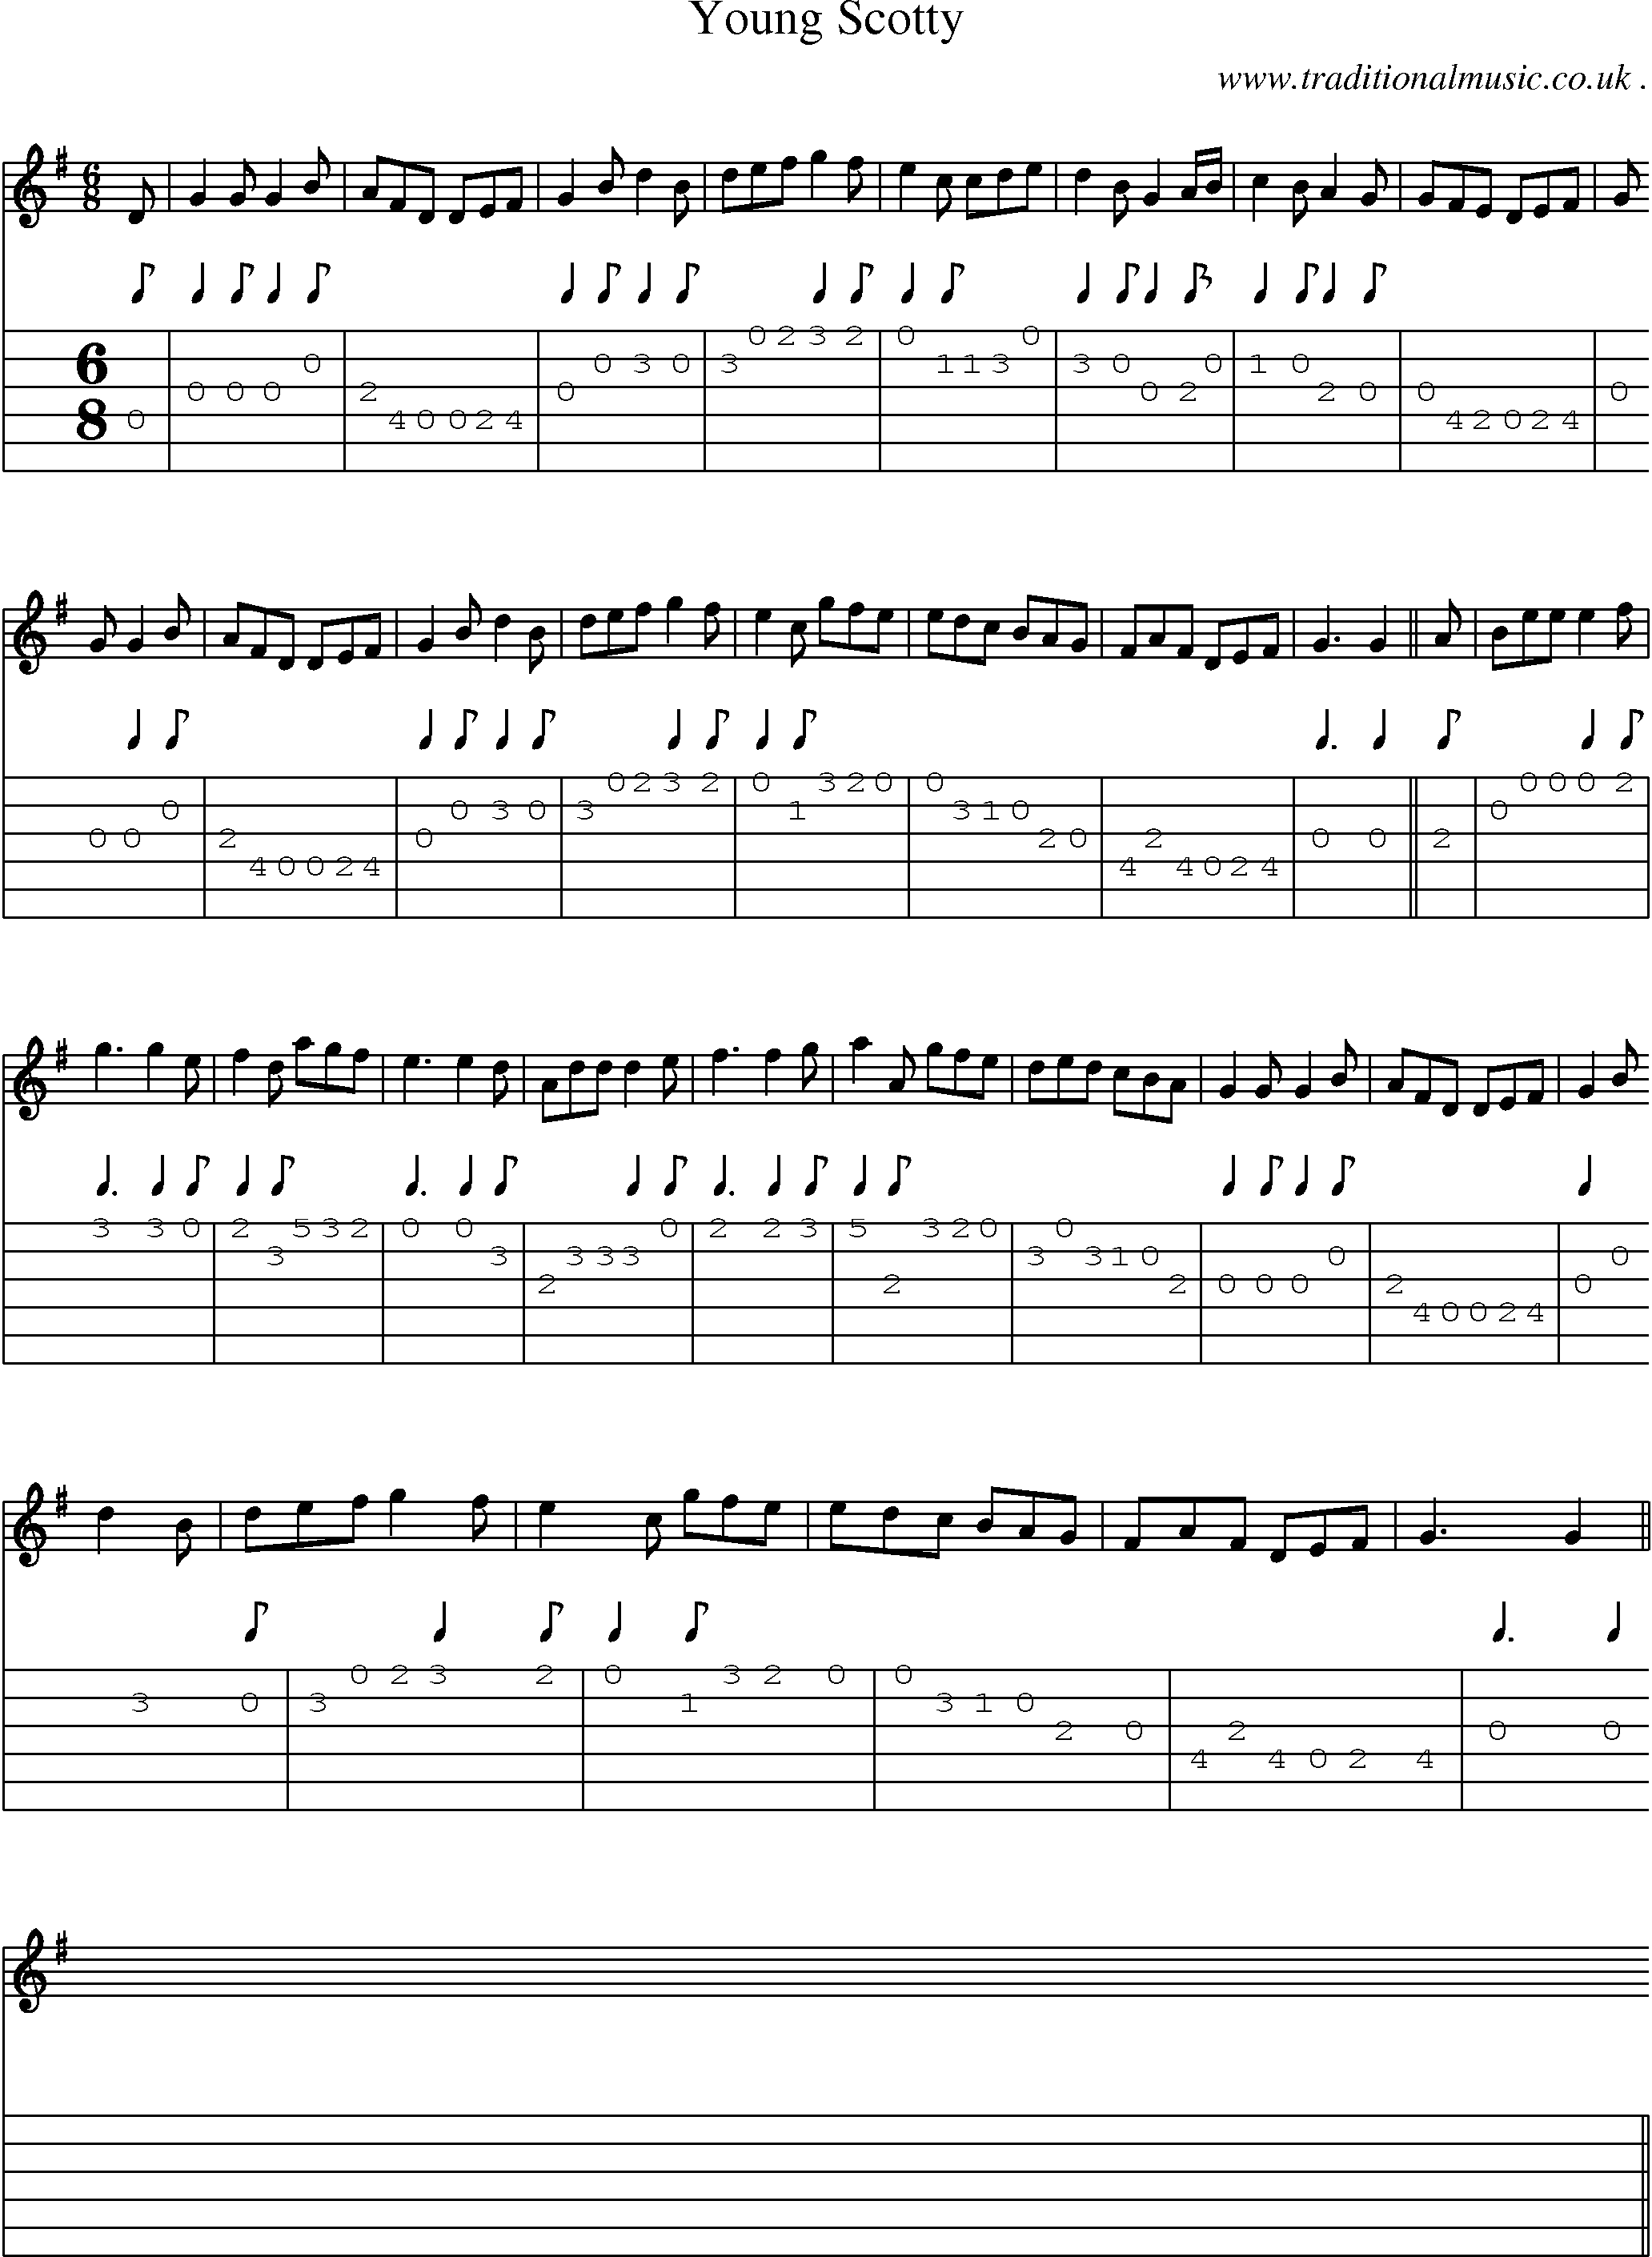 Sheet-Music and Guitar Tabs for Young Scotty